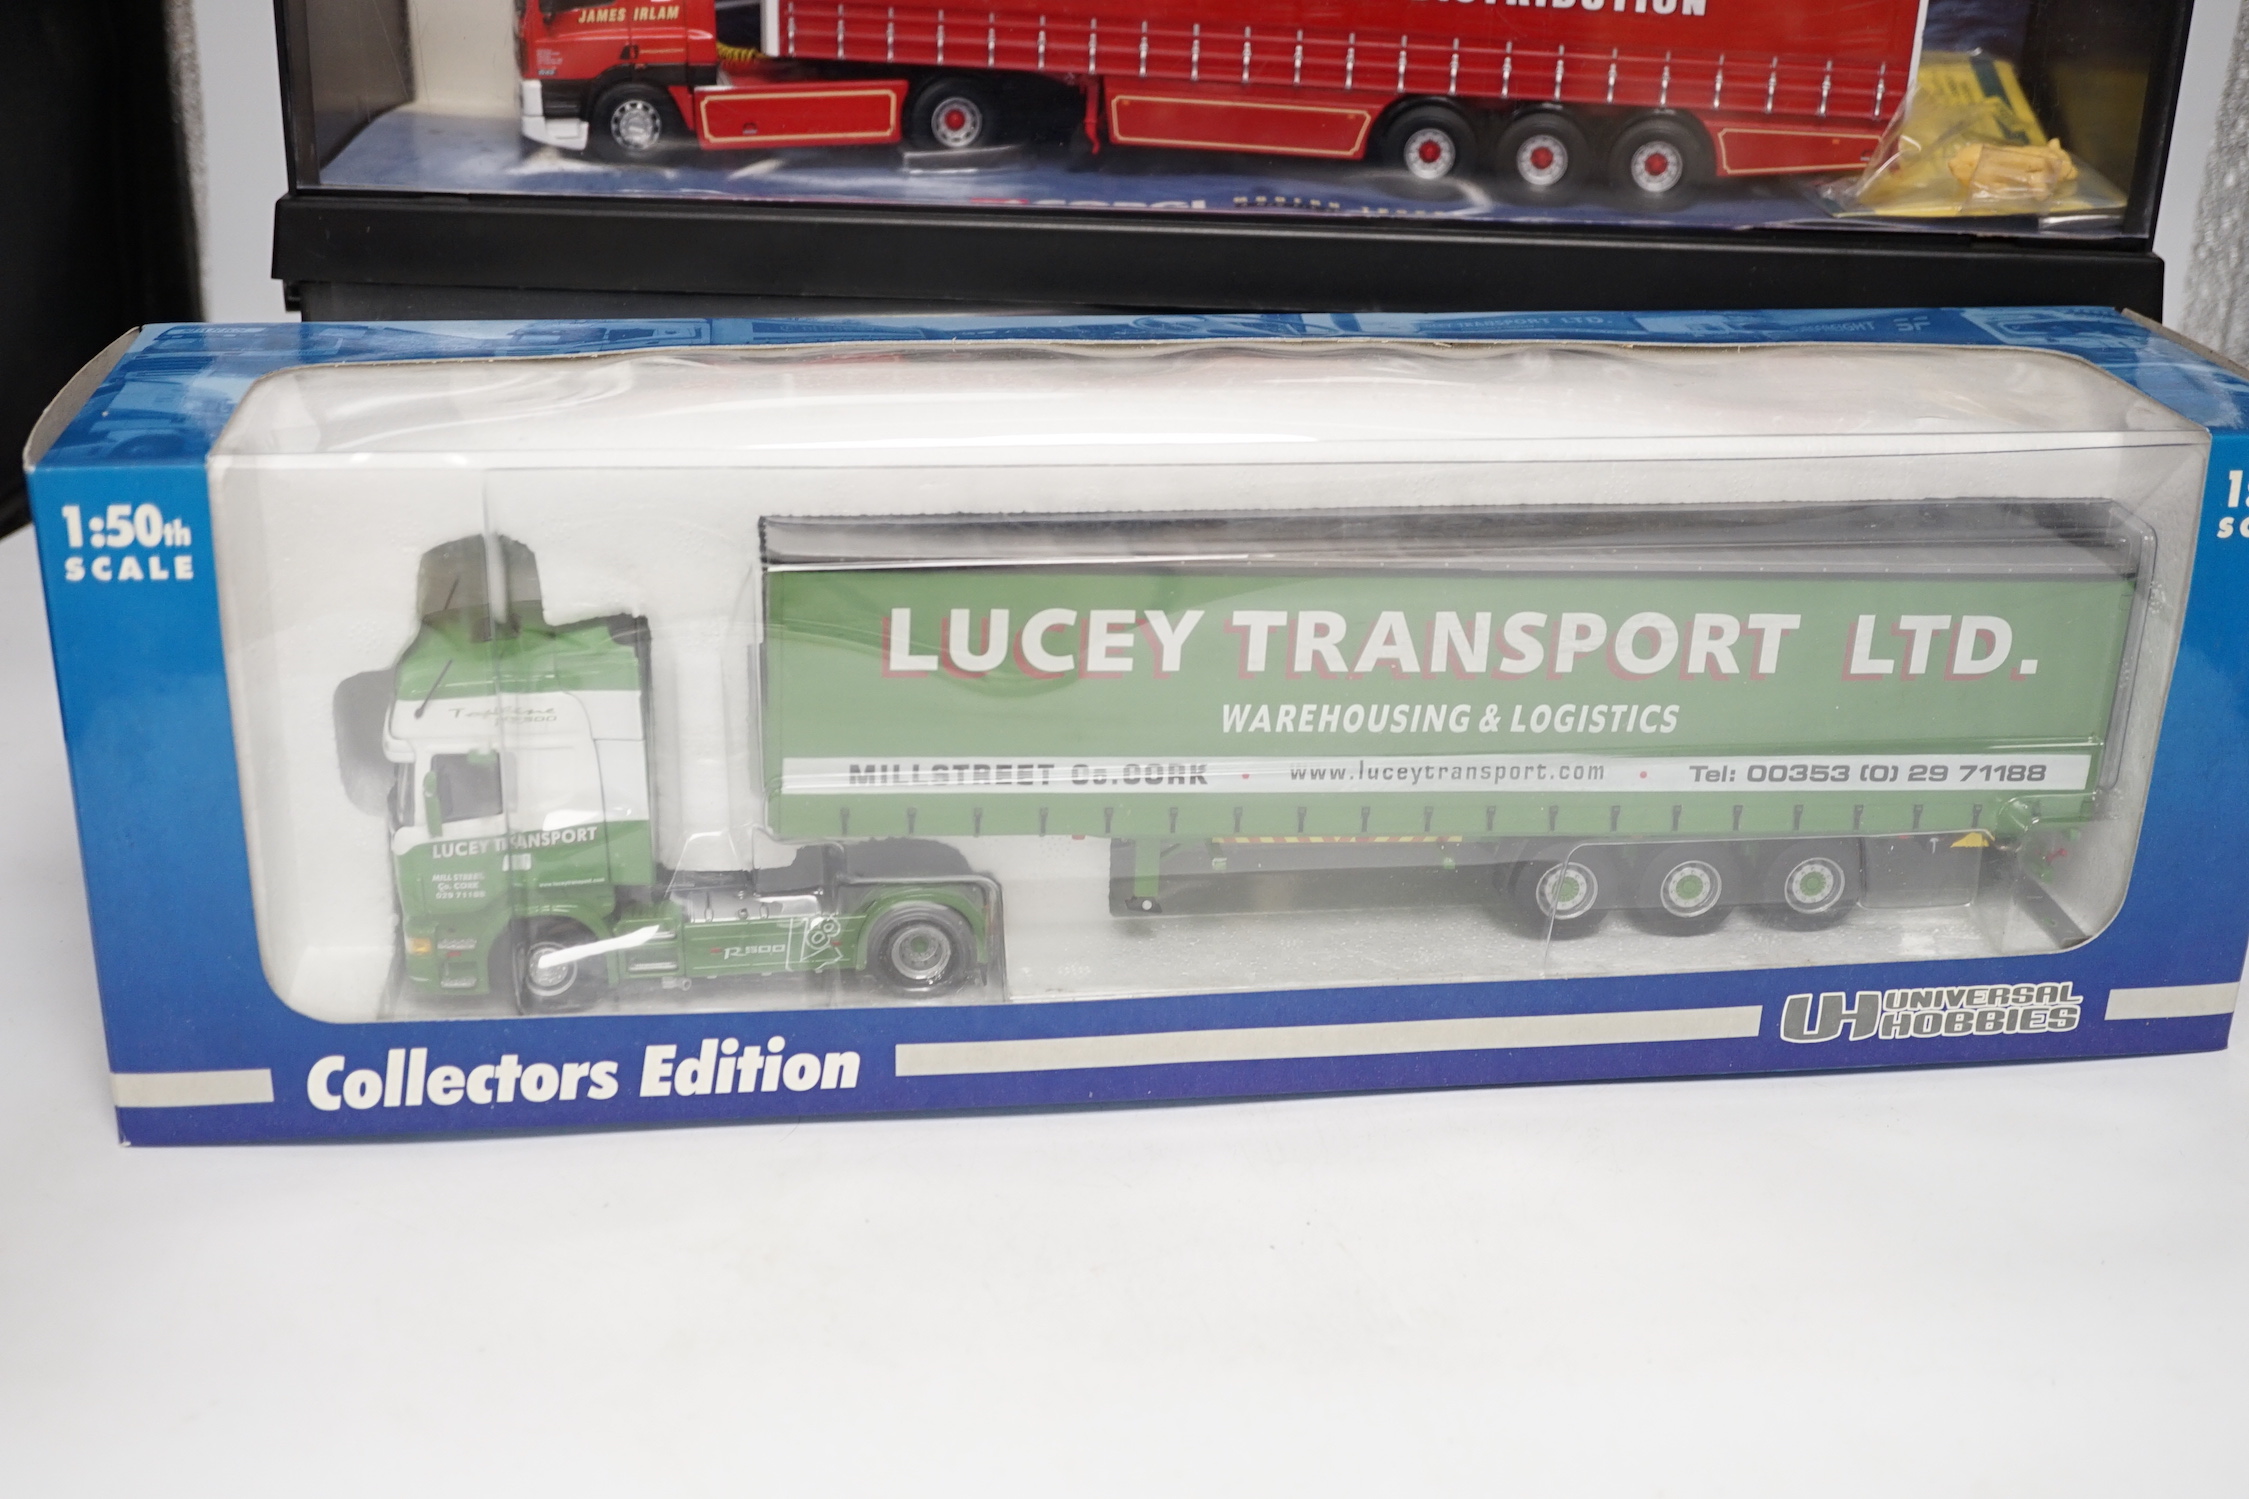 Four boxed Corgi and Universal Hobbies 1:50 scale articulated trucks; a Leyland DAF lorry (75401), an ERF curtainside lorry (75203), a Lion Toys DAF with box trailer, and a Universal Hobbies Scania Topline